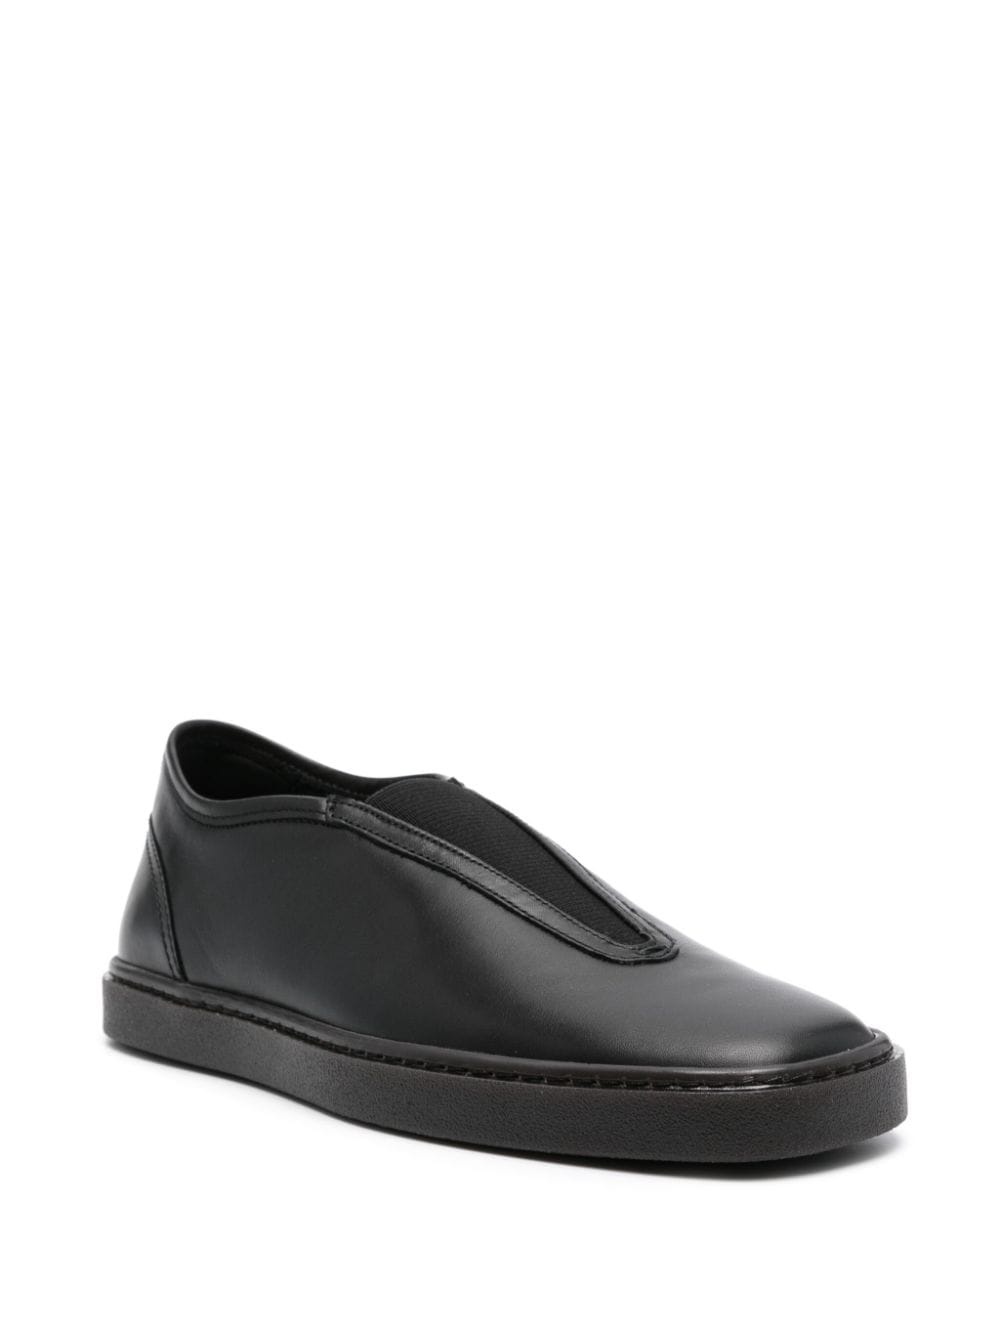 slip-on leather sneakers - 2